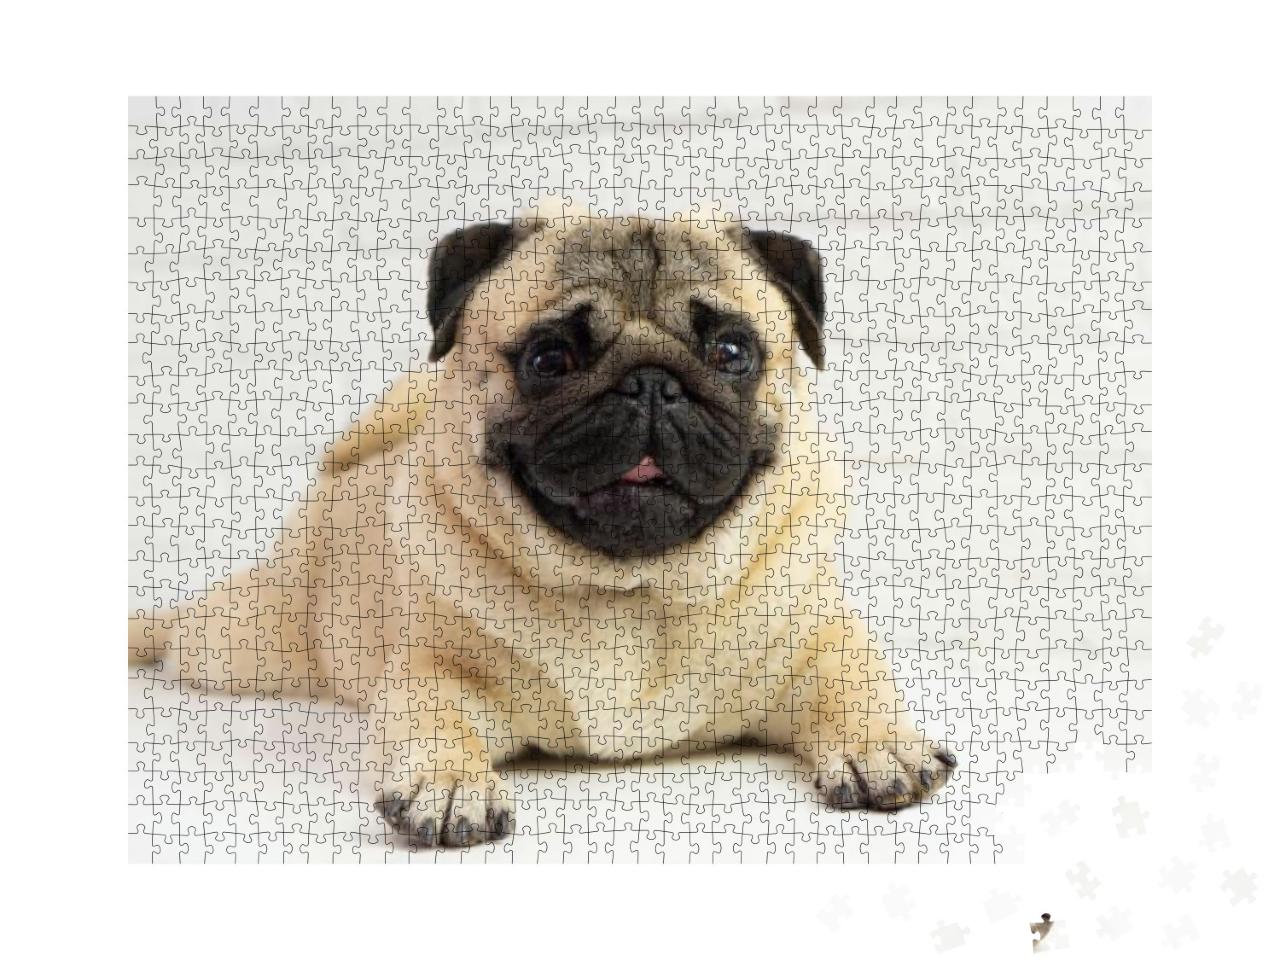 Funny Pug Dog Lies on the Background of a White Brick Wal... Jigsaw Puzzle with 1000 pieces